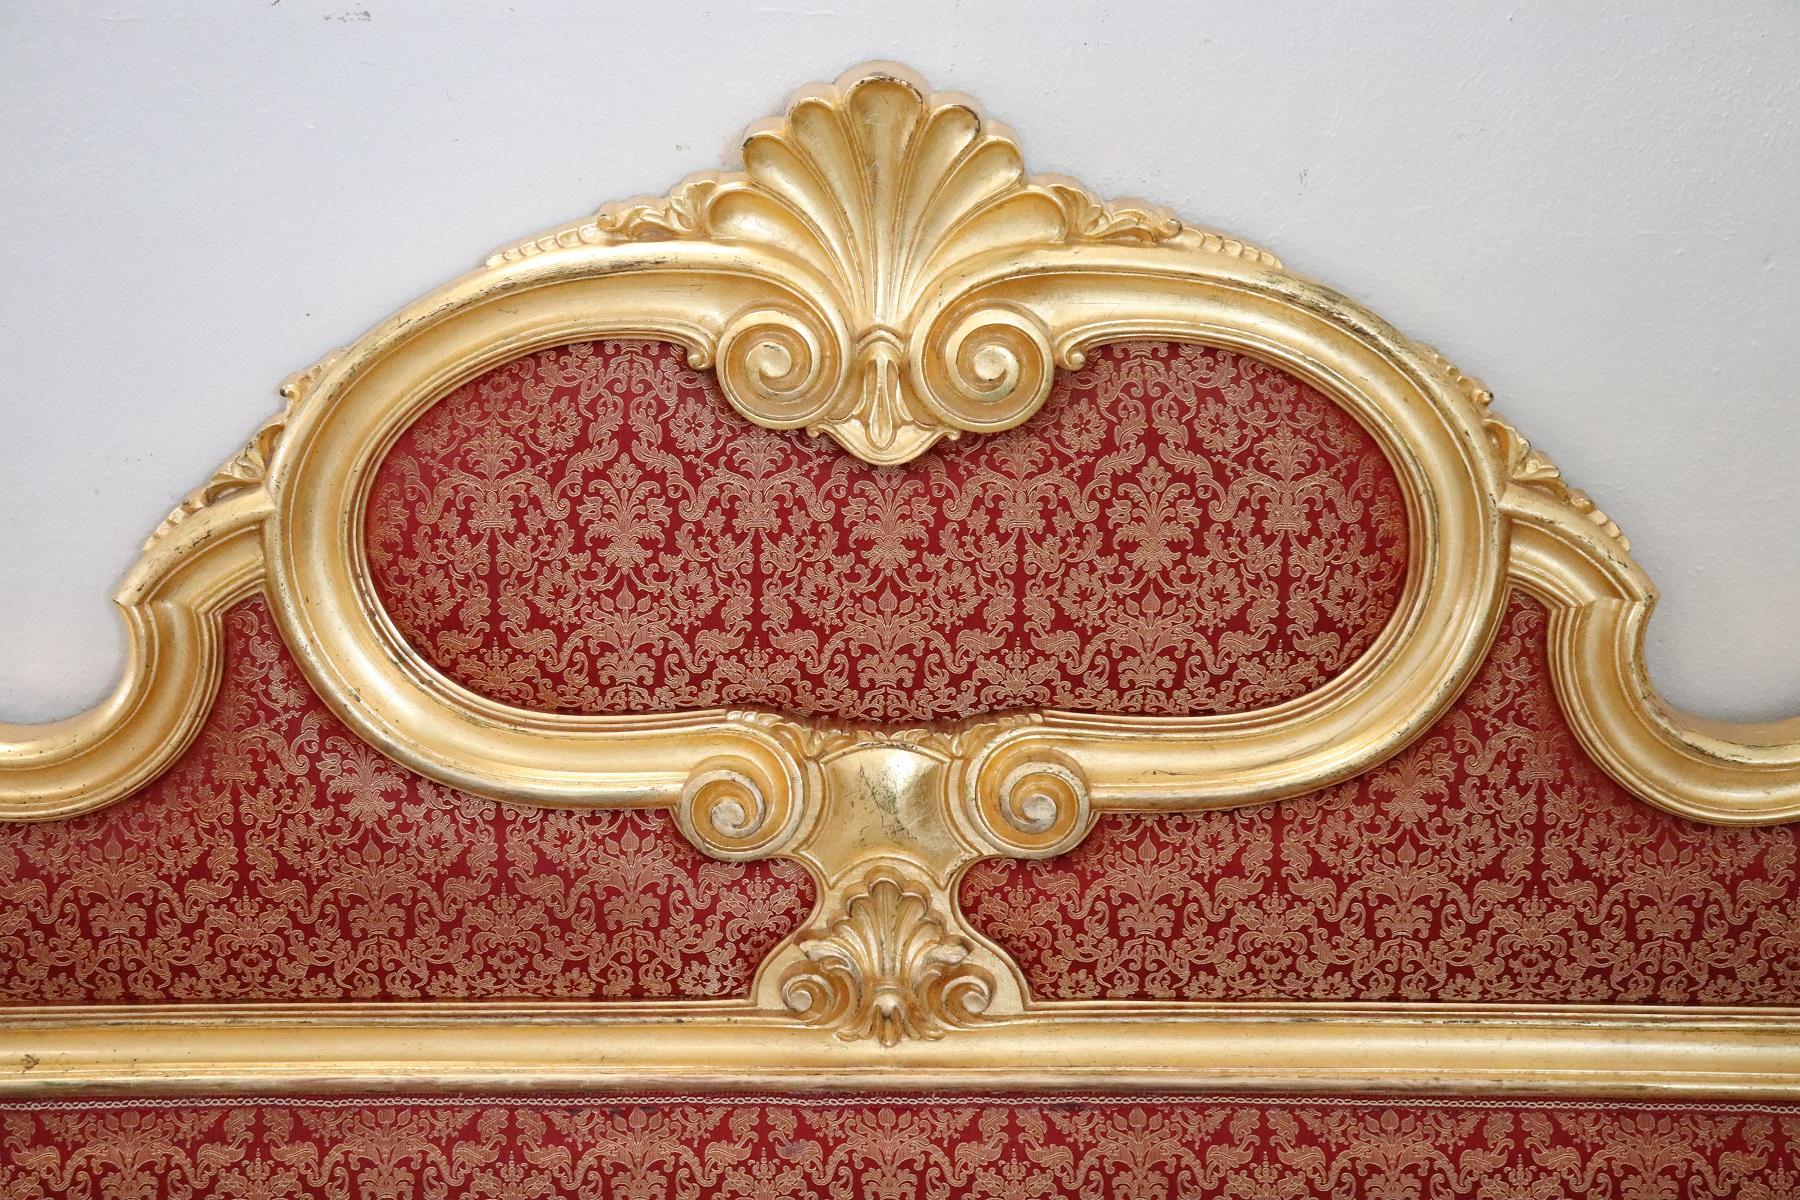 Italian Baroque style bed frame. Rich double bed headboard in carved and gilded wood. Great woodwork with lots of curls and swirls of typical Italian Baroque taste. In the central part a refined red fabric.